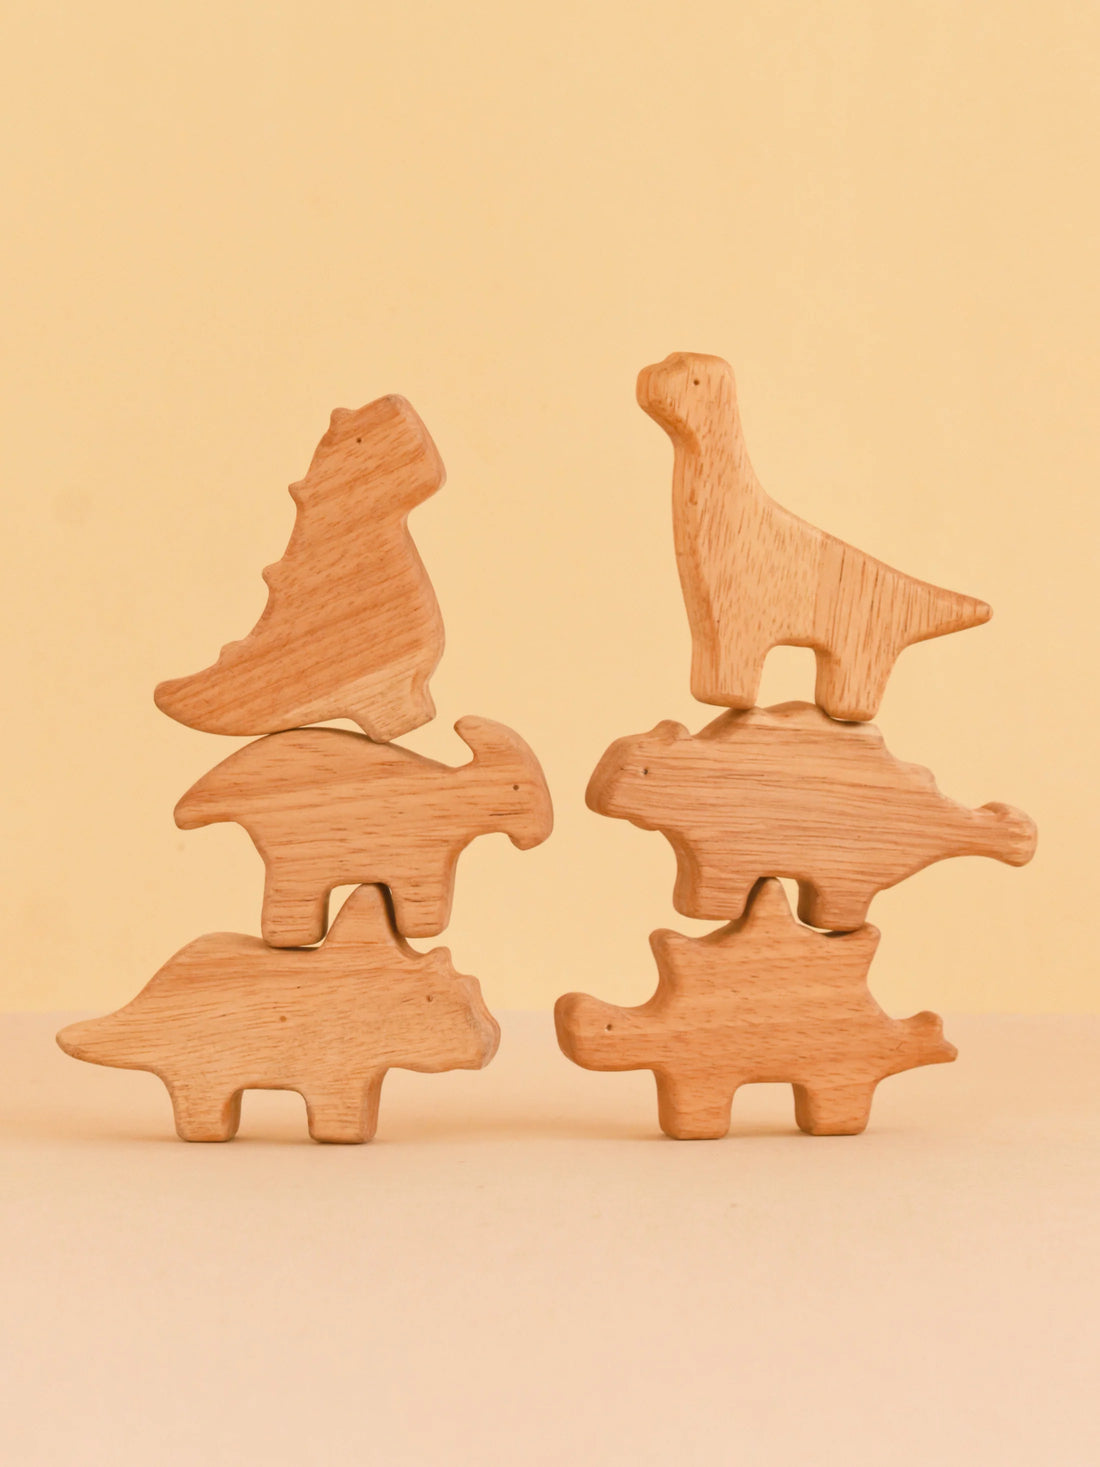 Cognitive Development with Wooden Toys